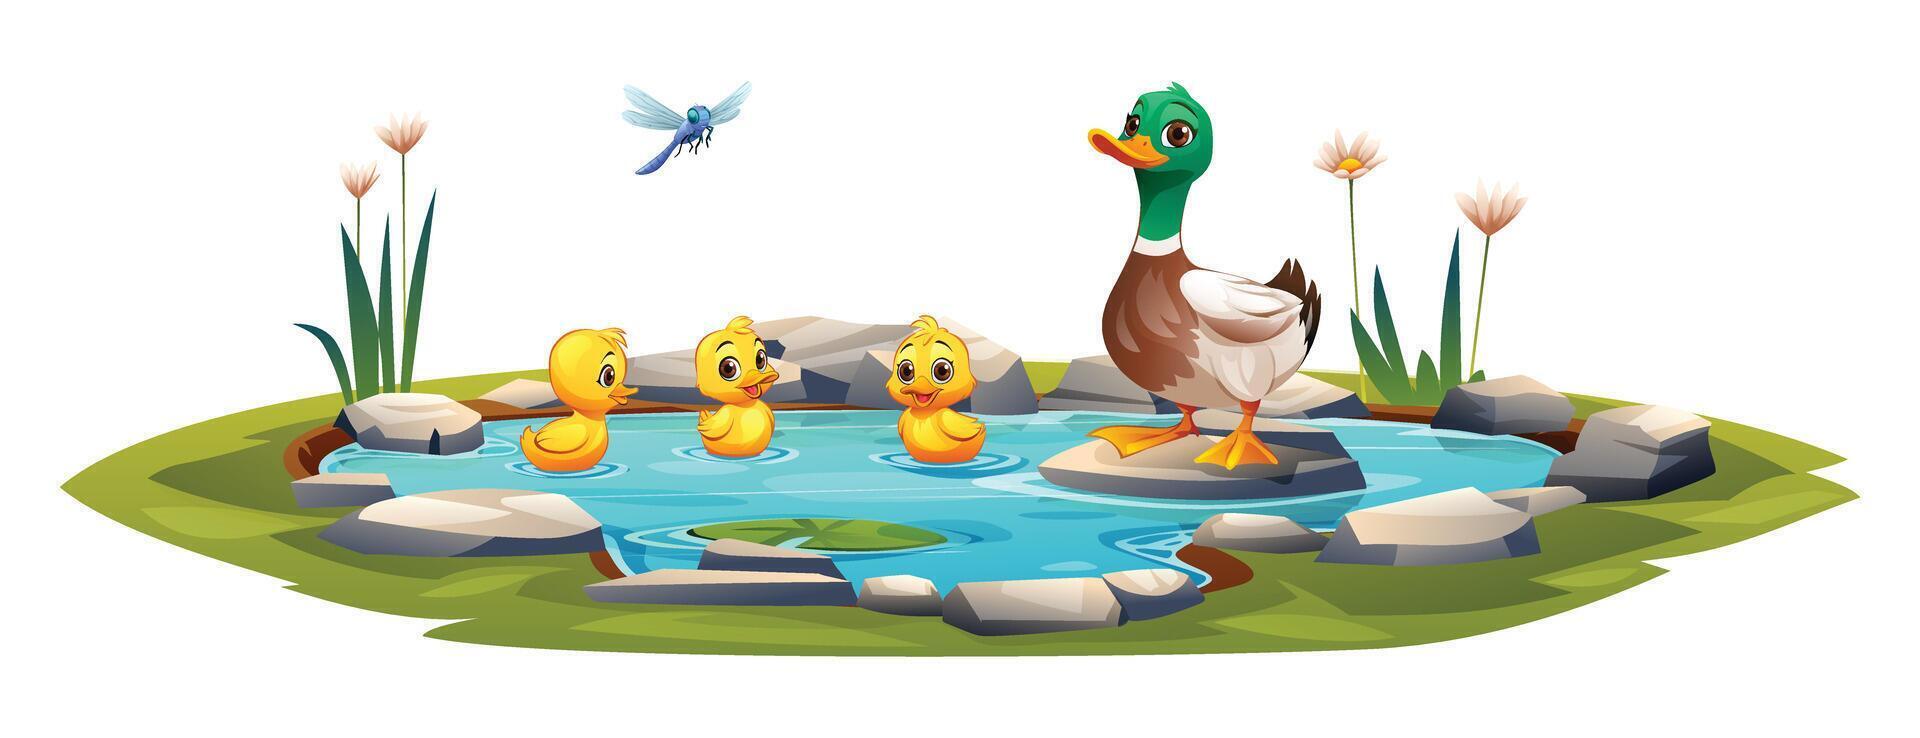 Duck and ducklings swimming in the pond. Vector cartoon illustration